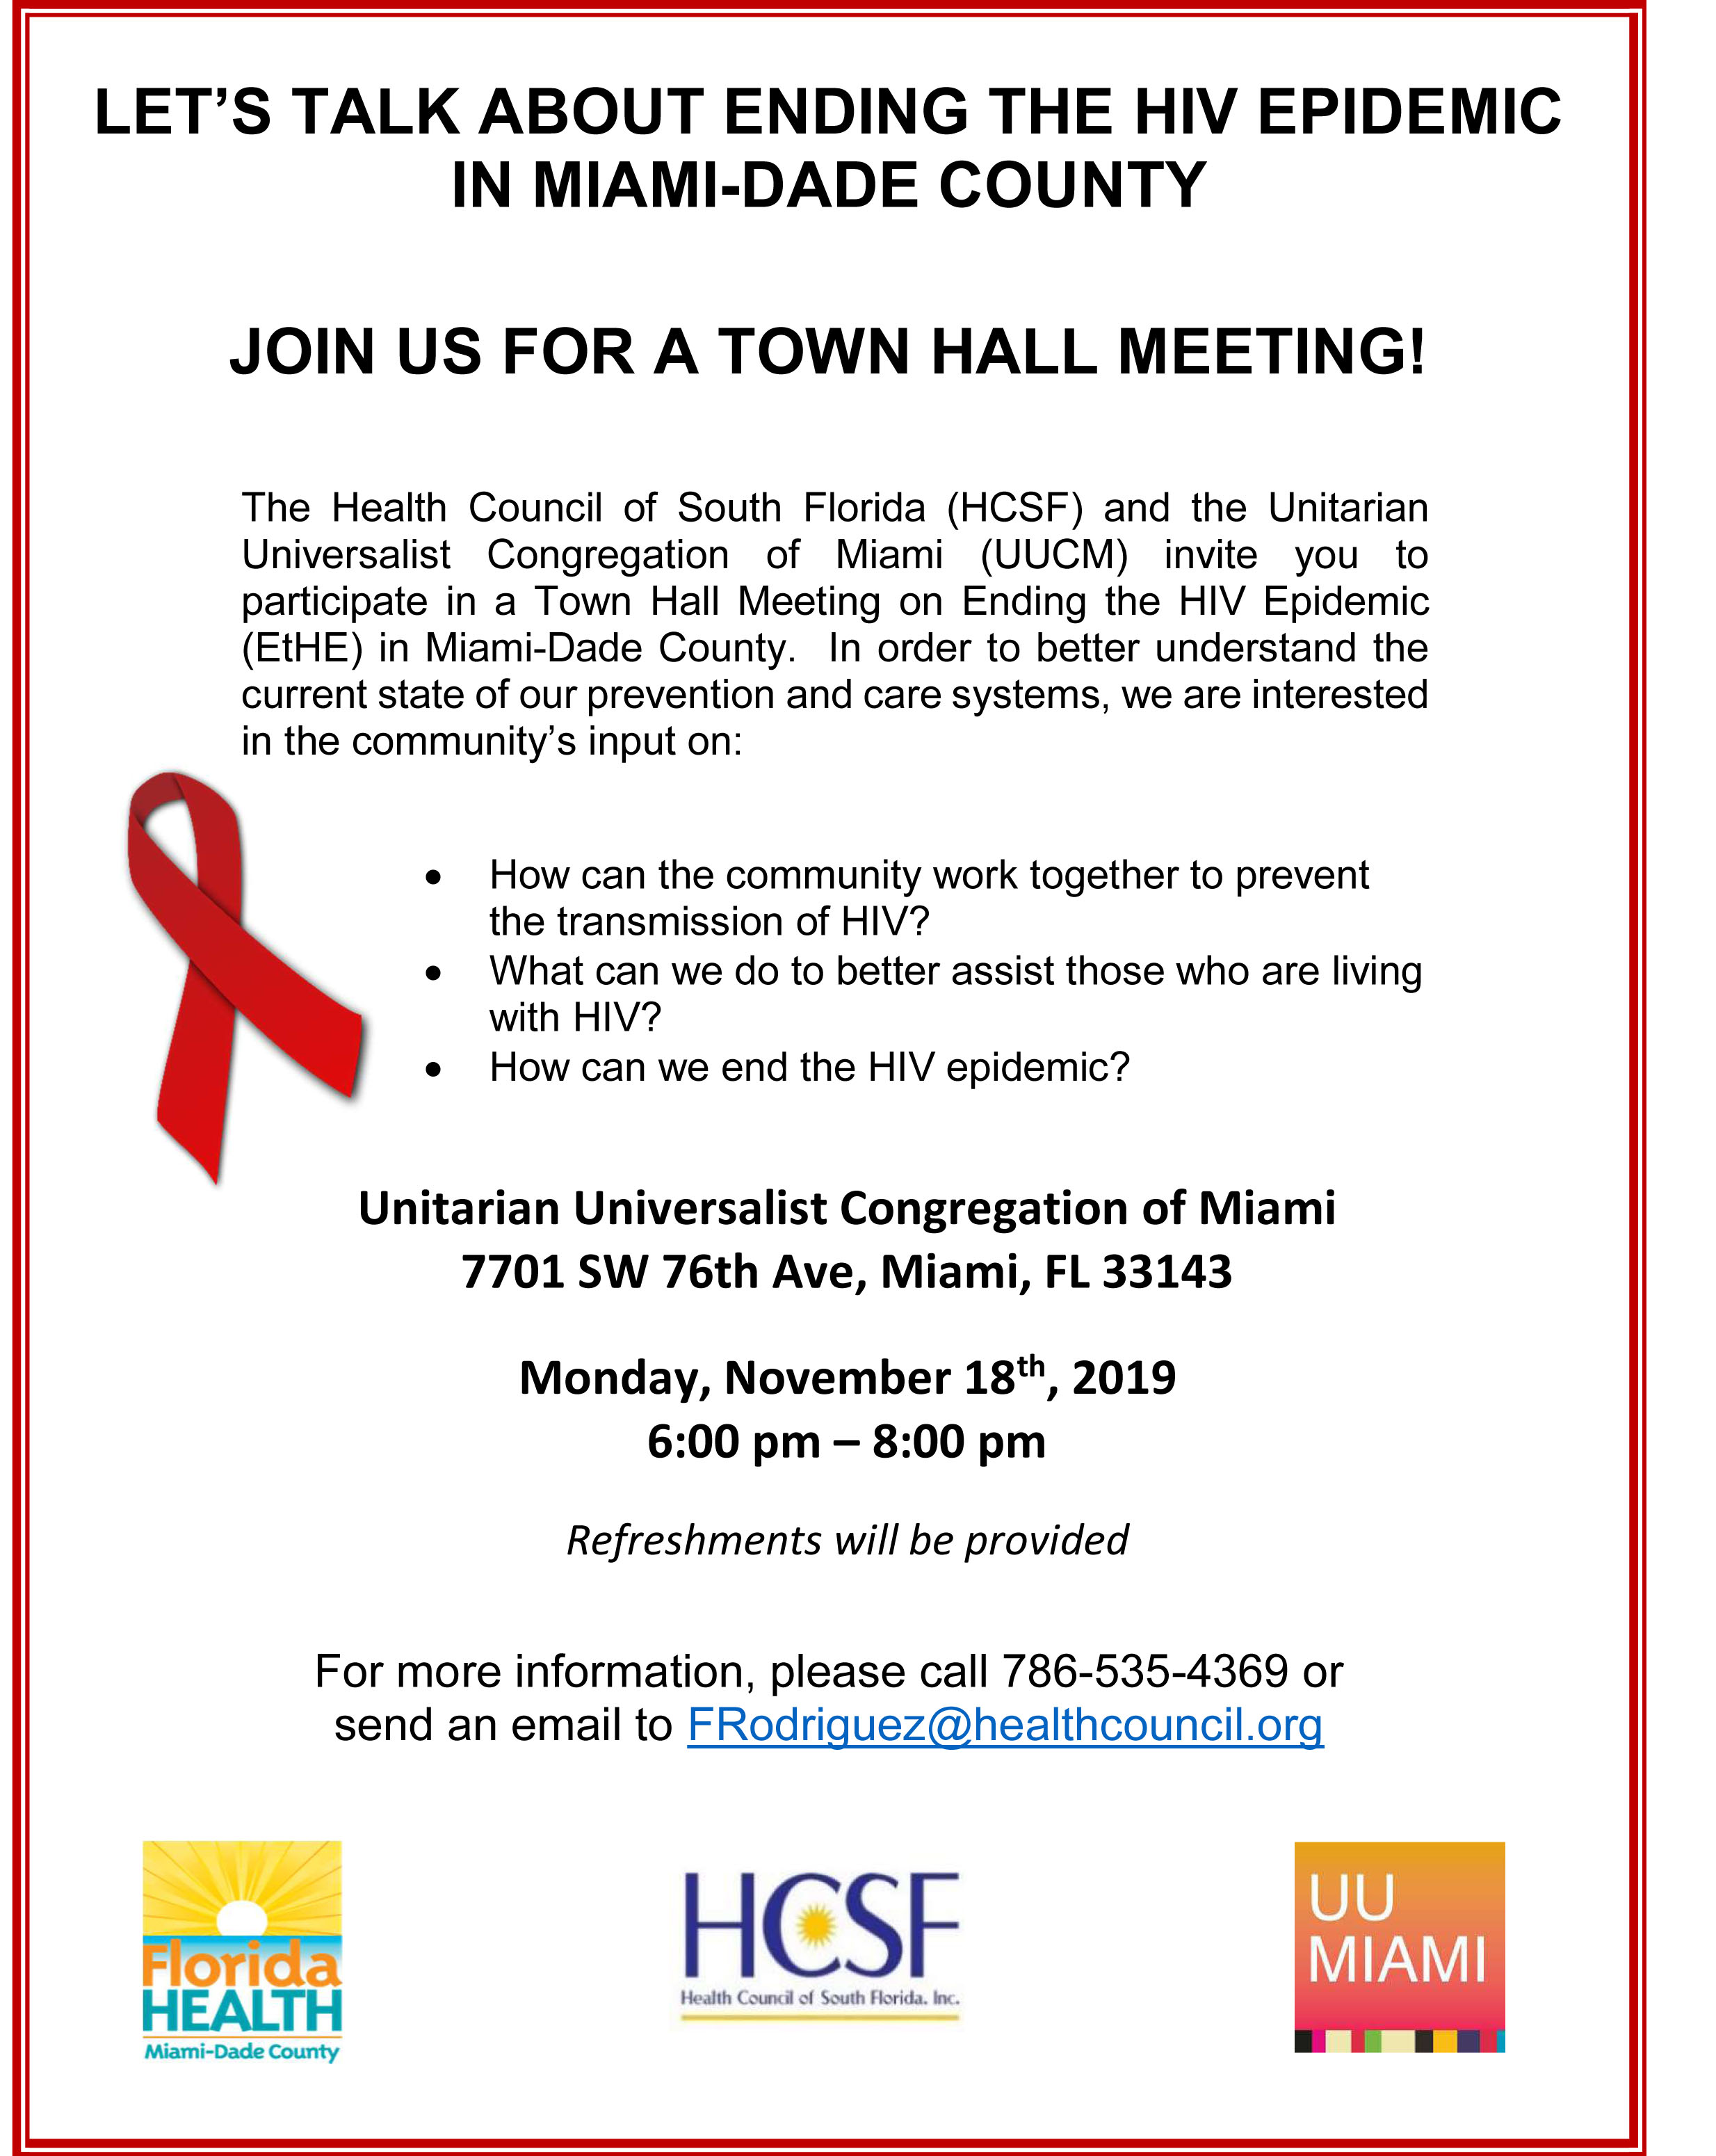 2019-11-18-Let's Talk About Ending The HIV Epidemic in Miami-Dade County Join Us for Town Hall Meeting